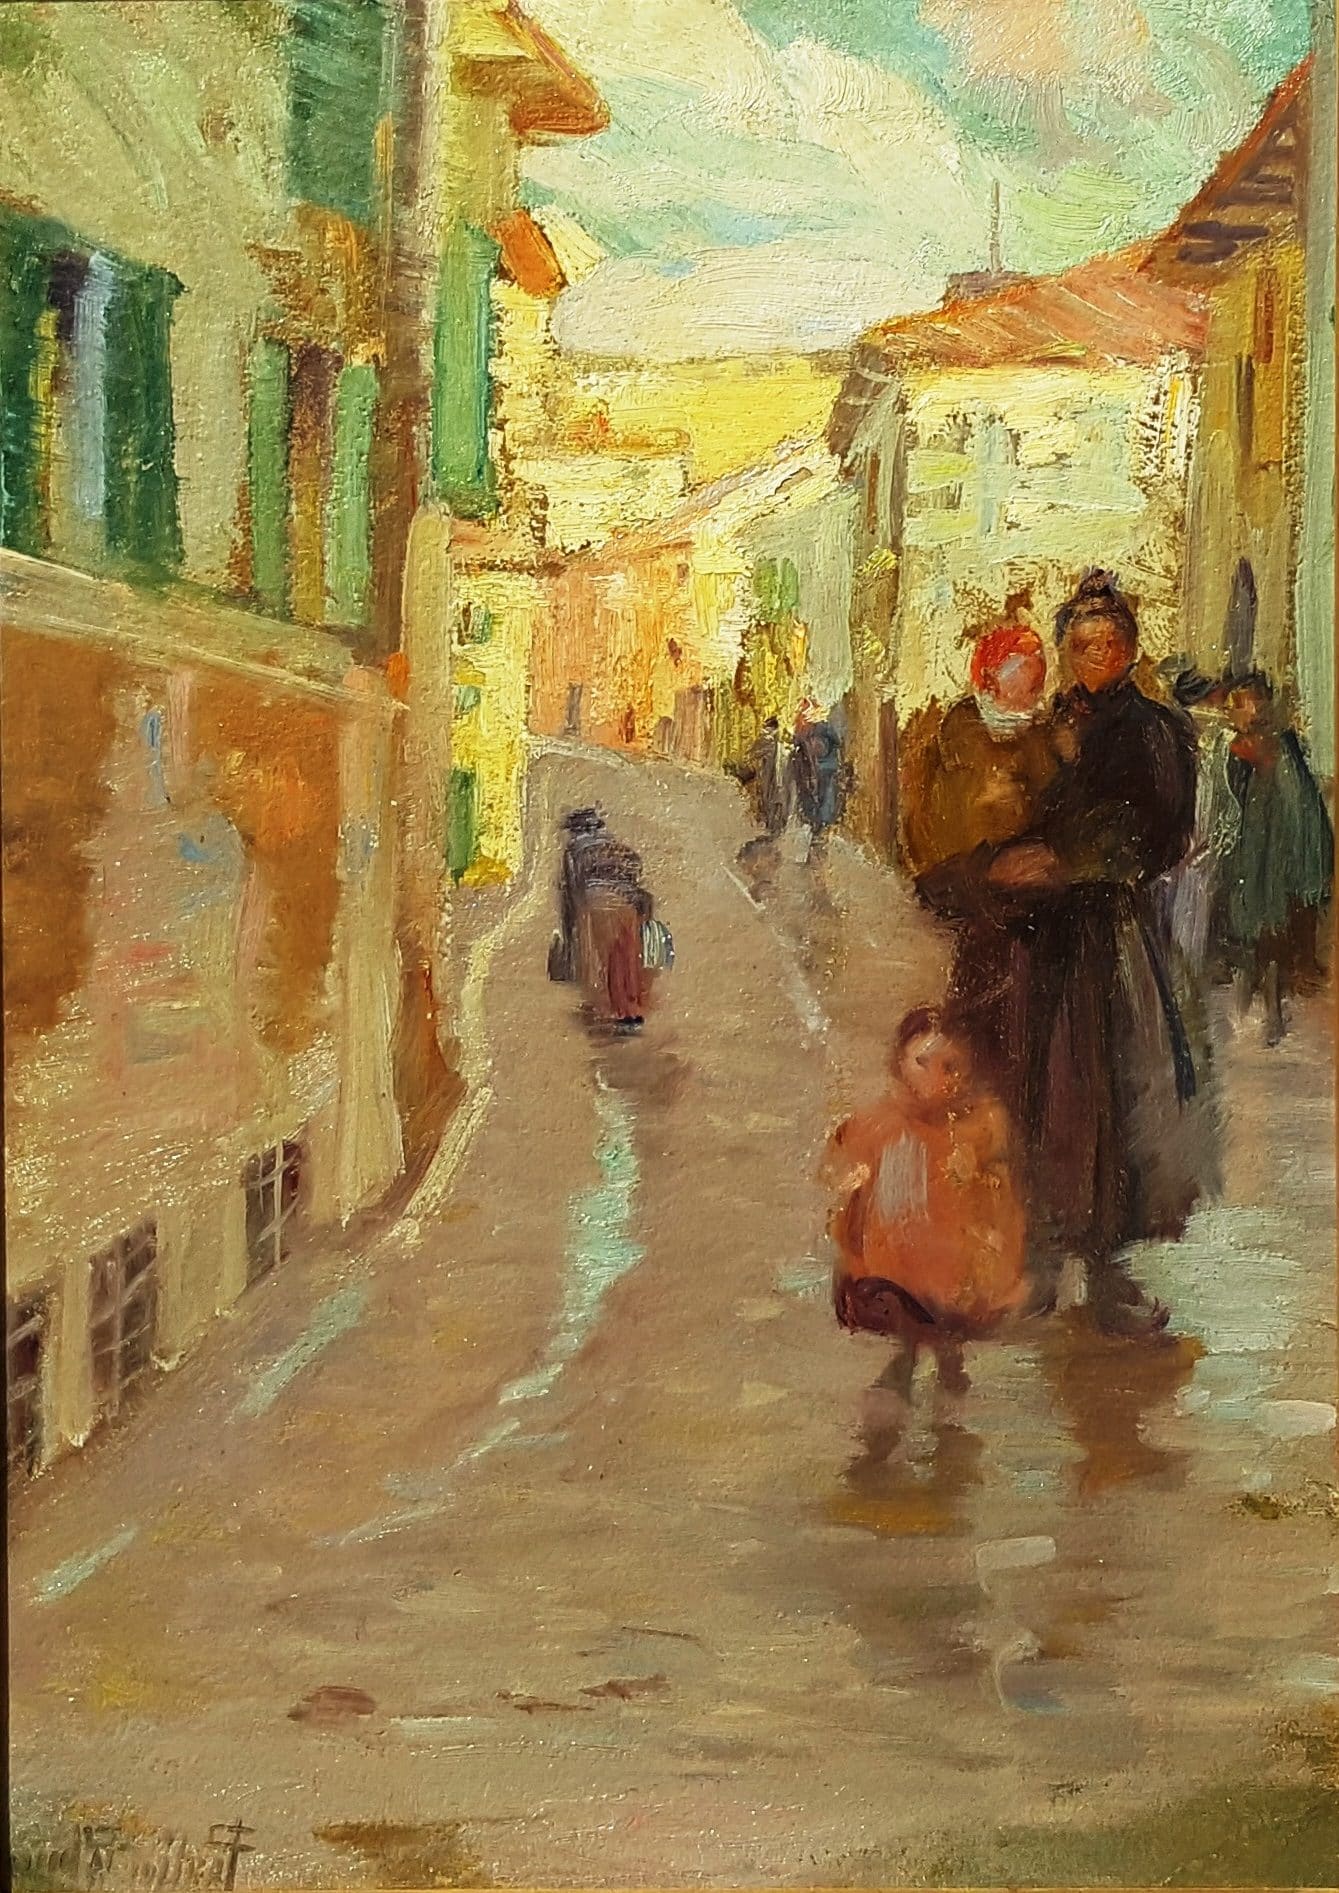 Palmer's After the Rain. A street scene with a woman carrying her child, and leading another, down a road made glossy by rain. Yellow buildings with green shutters line the street.